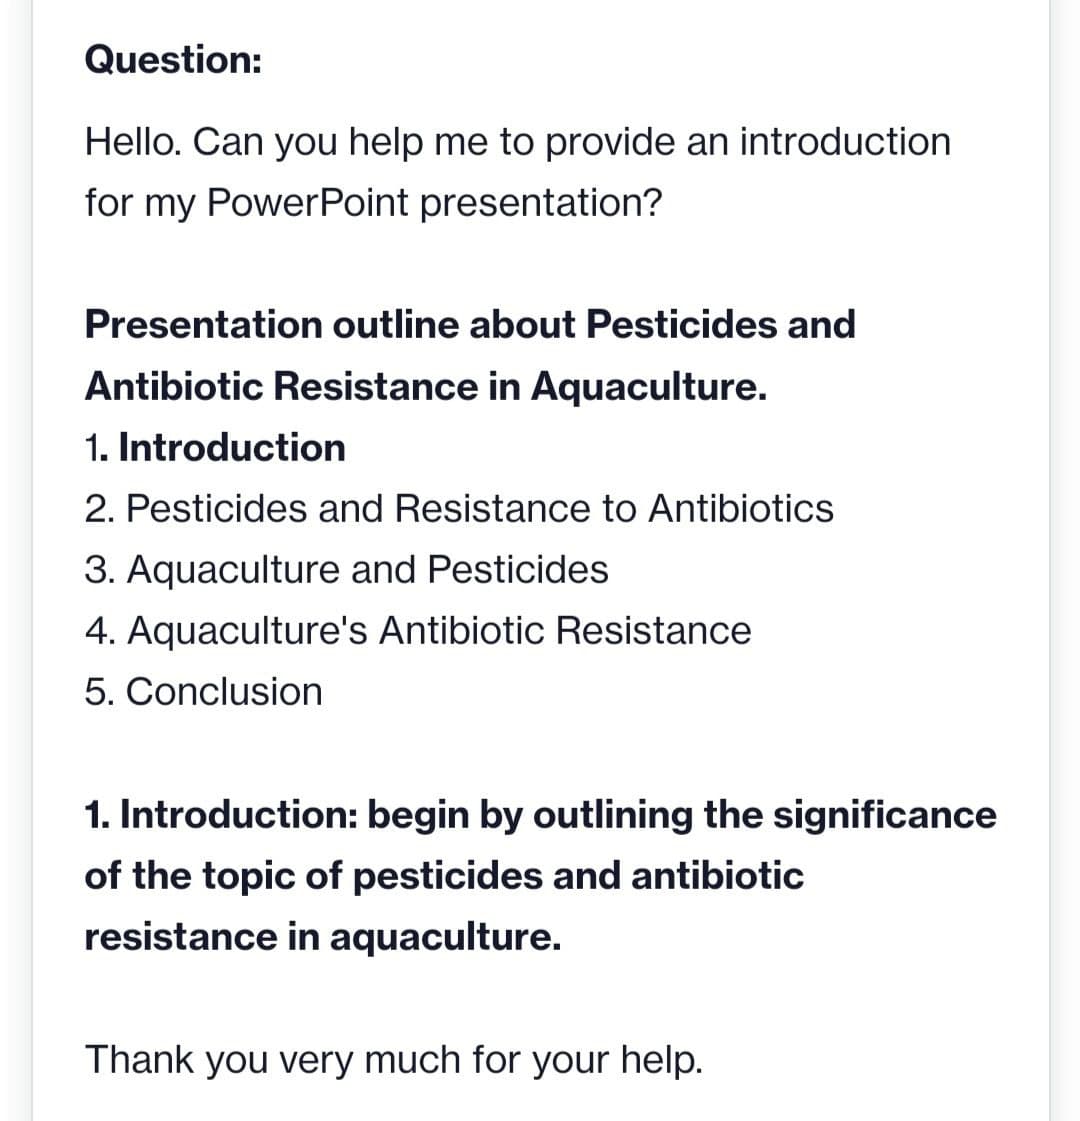 Question:
Hello. Can you help me to provide an introduction
for my PowerPoint presentation?
Presentation outline about Pesticides and
Antibiotic Resistance in Aquaculture.
1. Introduction
2. Pesticides and Resistance to Antibiotics
3. Aquaculture and Pesticides
4. Aquaculture's Antibiotic Resistance
5. Conclusion
1. Introduction: begin by outlining the significance
of the topic of pesticides and antibiotic
resistance in aquaculture.
Thank you very much for your help.